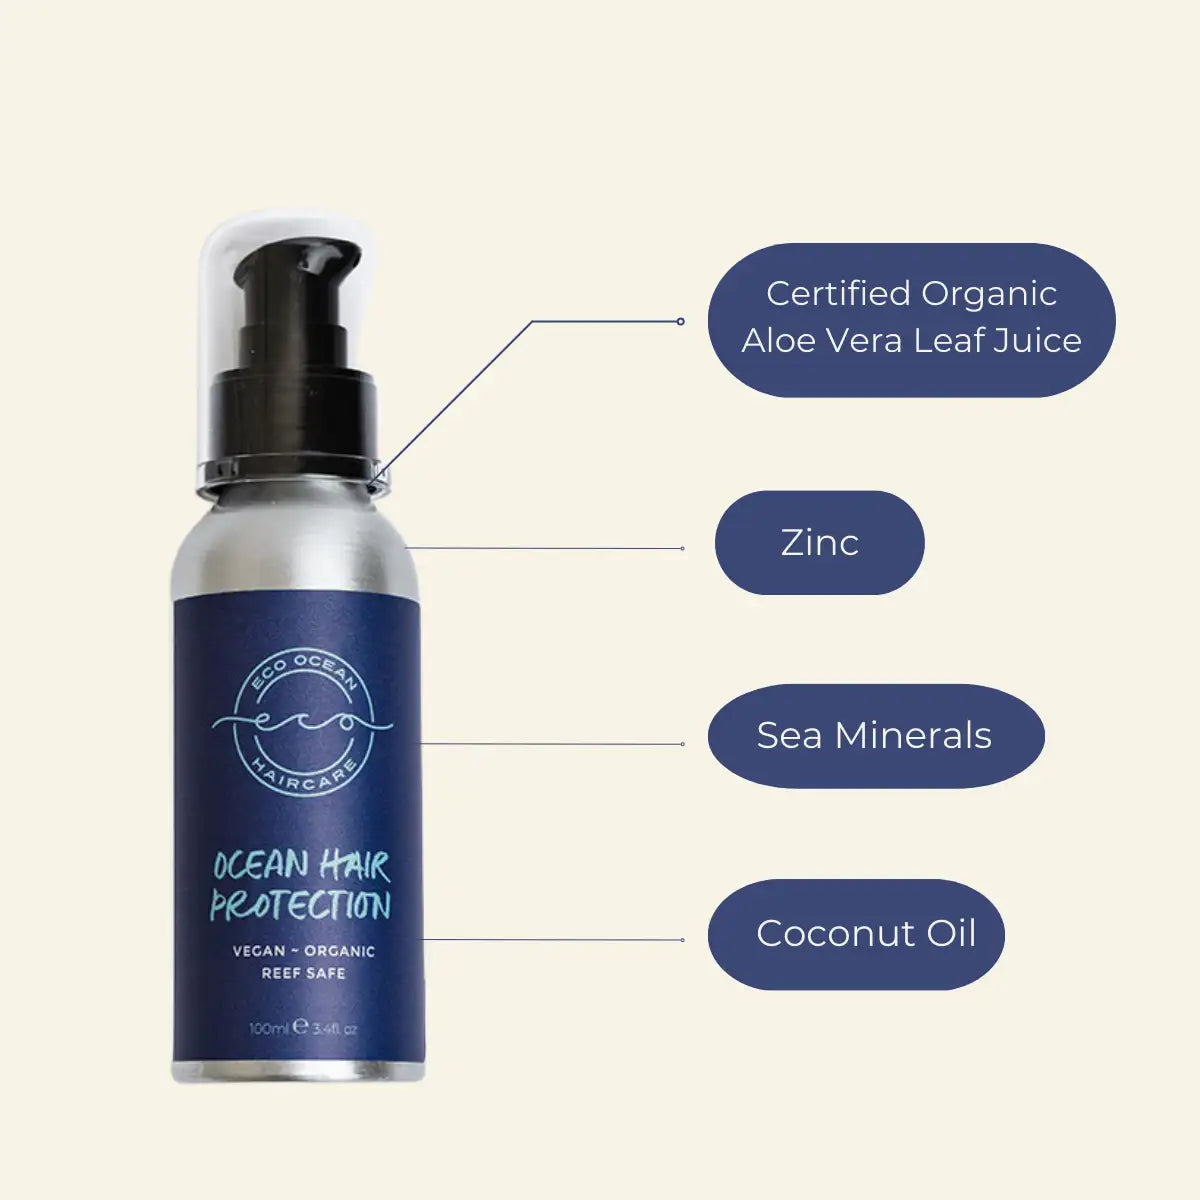 Composition of Ocean Hair Protection by Eco Ocean Haircare